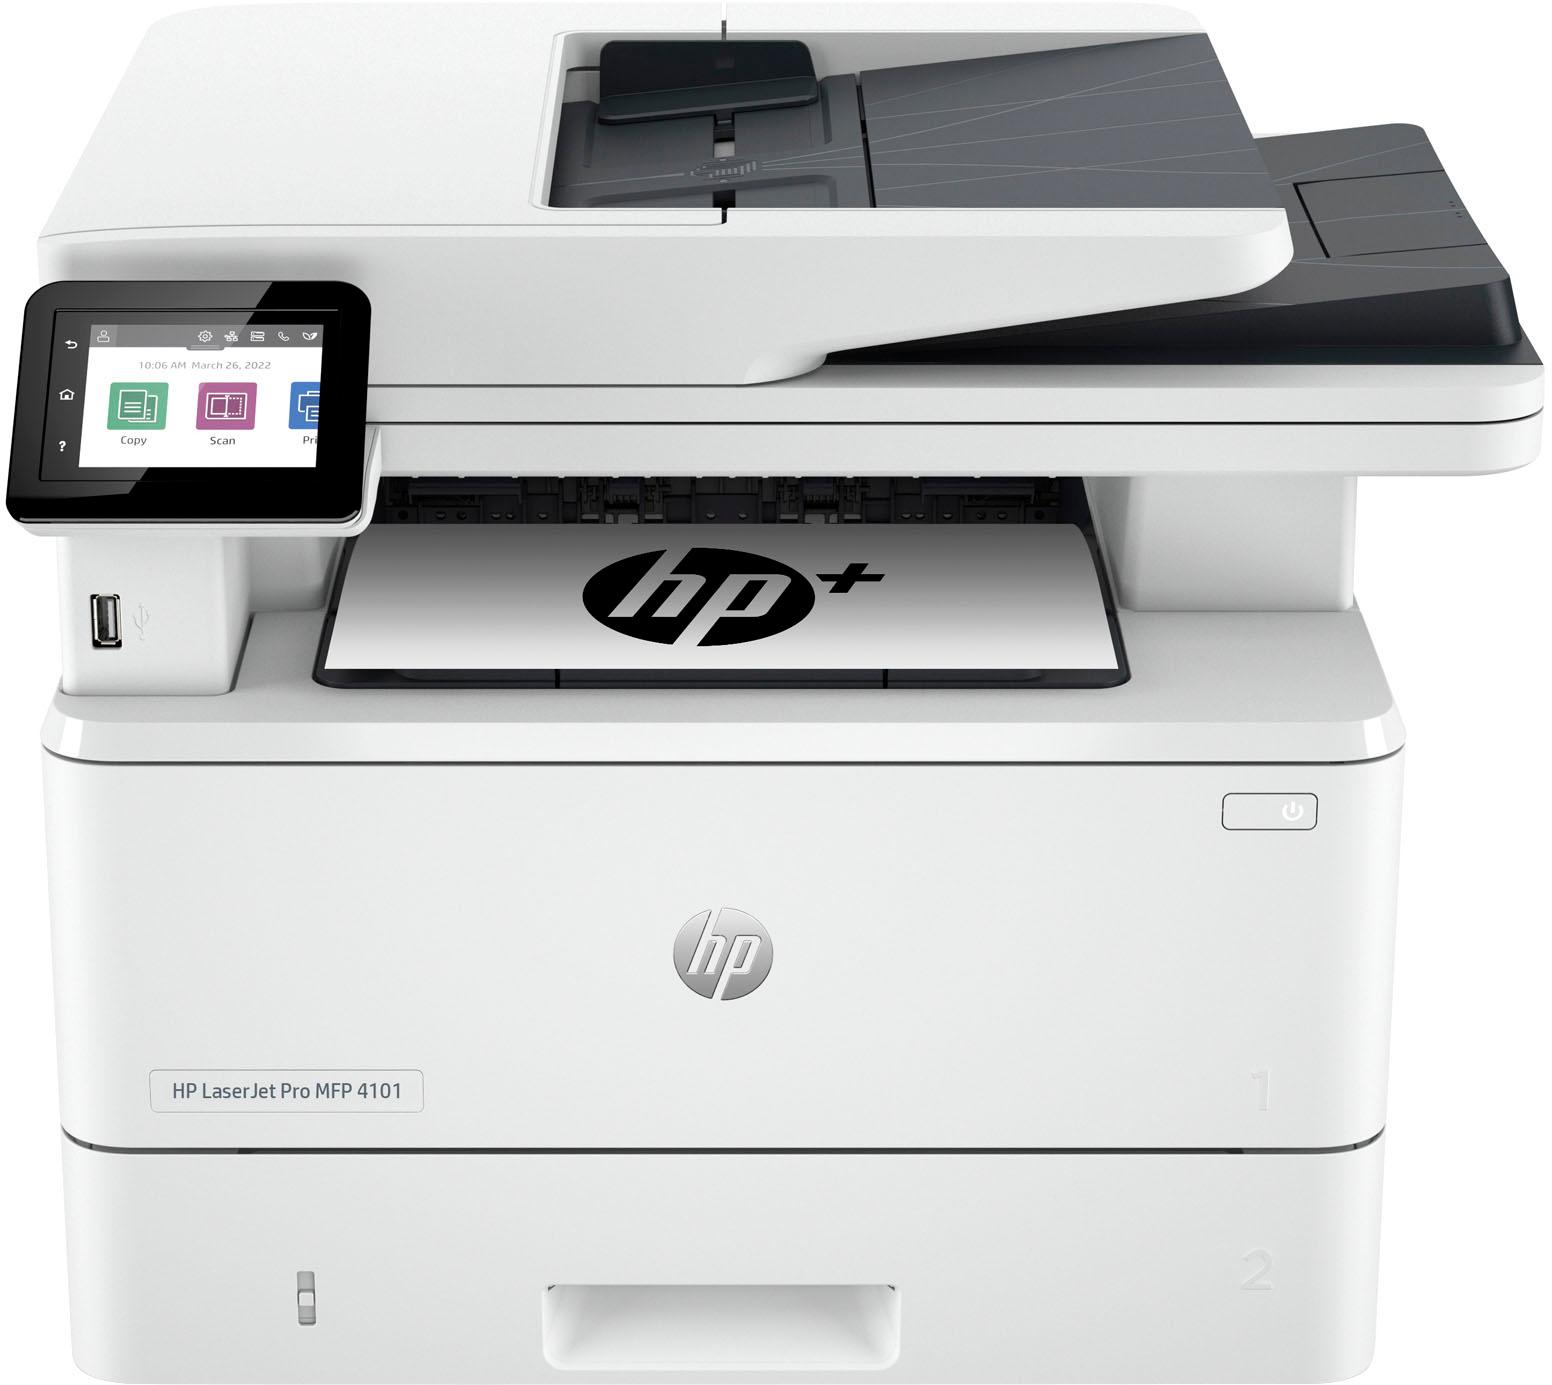 Hover Ongeautoriseerd helemaal HP LaserJet Pro MFP 4101fdne All-In-One Black-and-White Laser Printer with  3 months of Instant Ink included with HP+ White LaserJet Pro MFP 4101fdne -  Best Buy